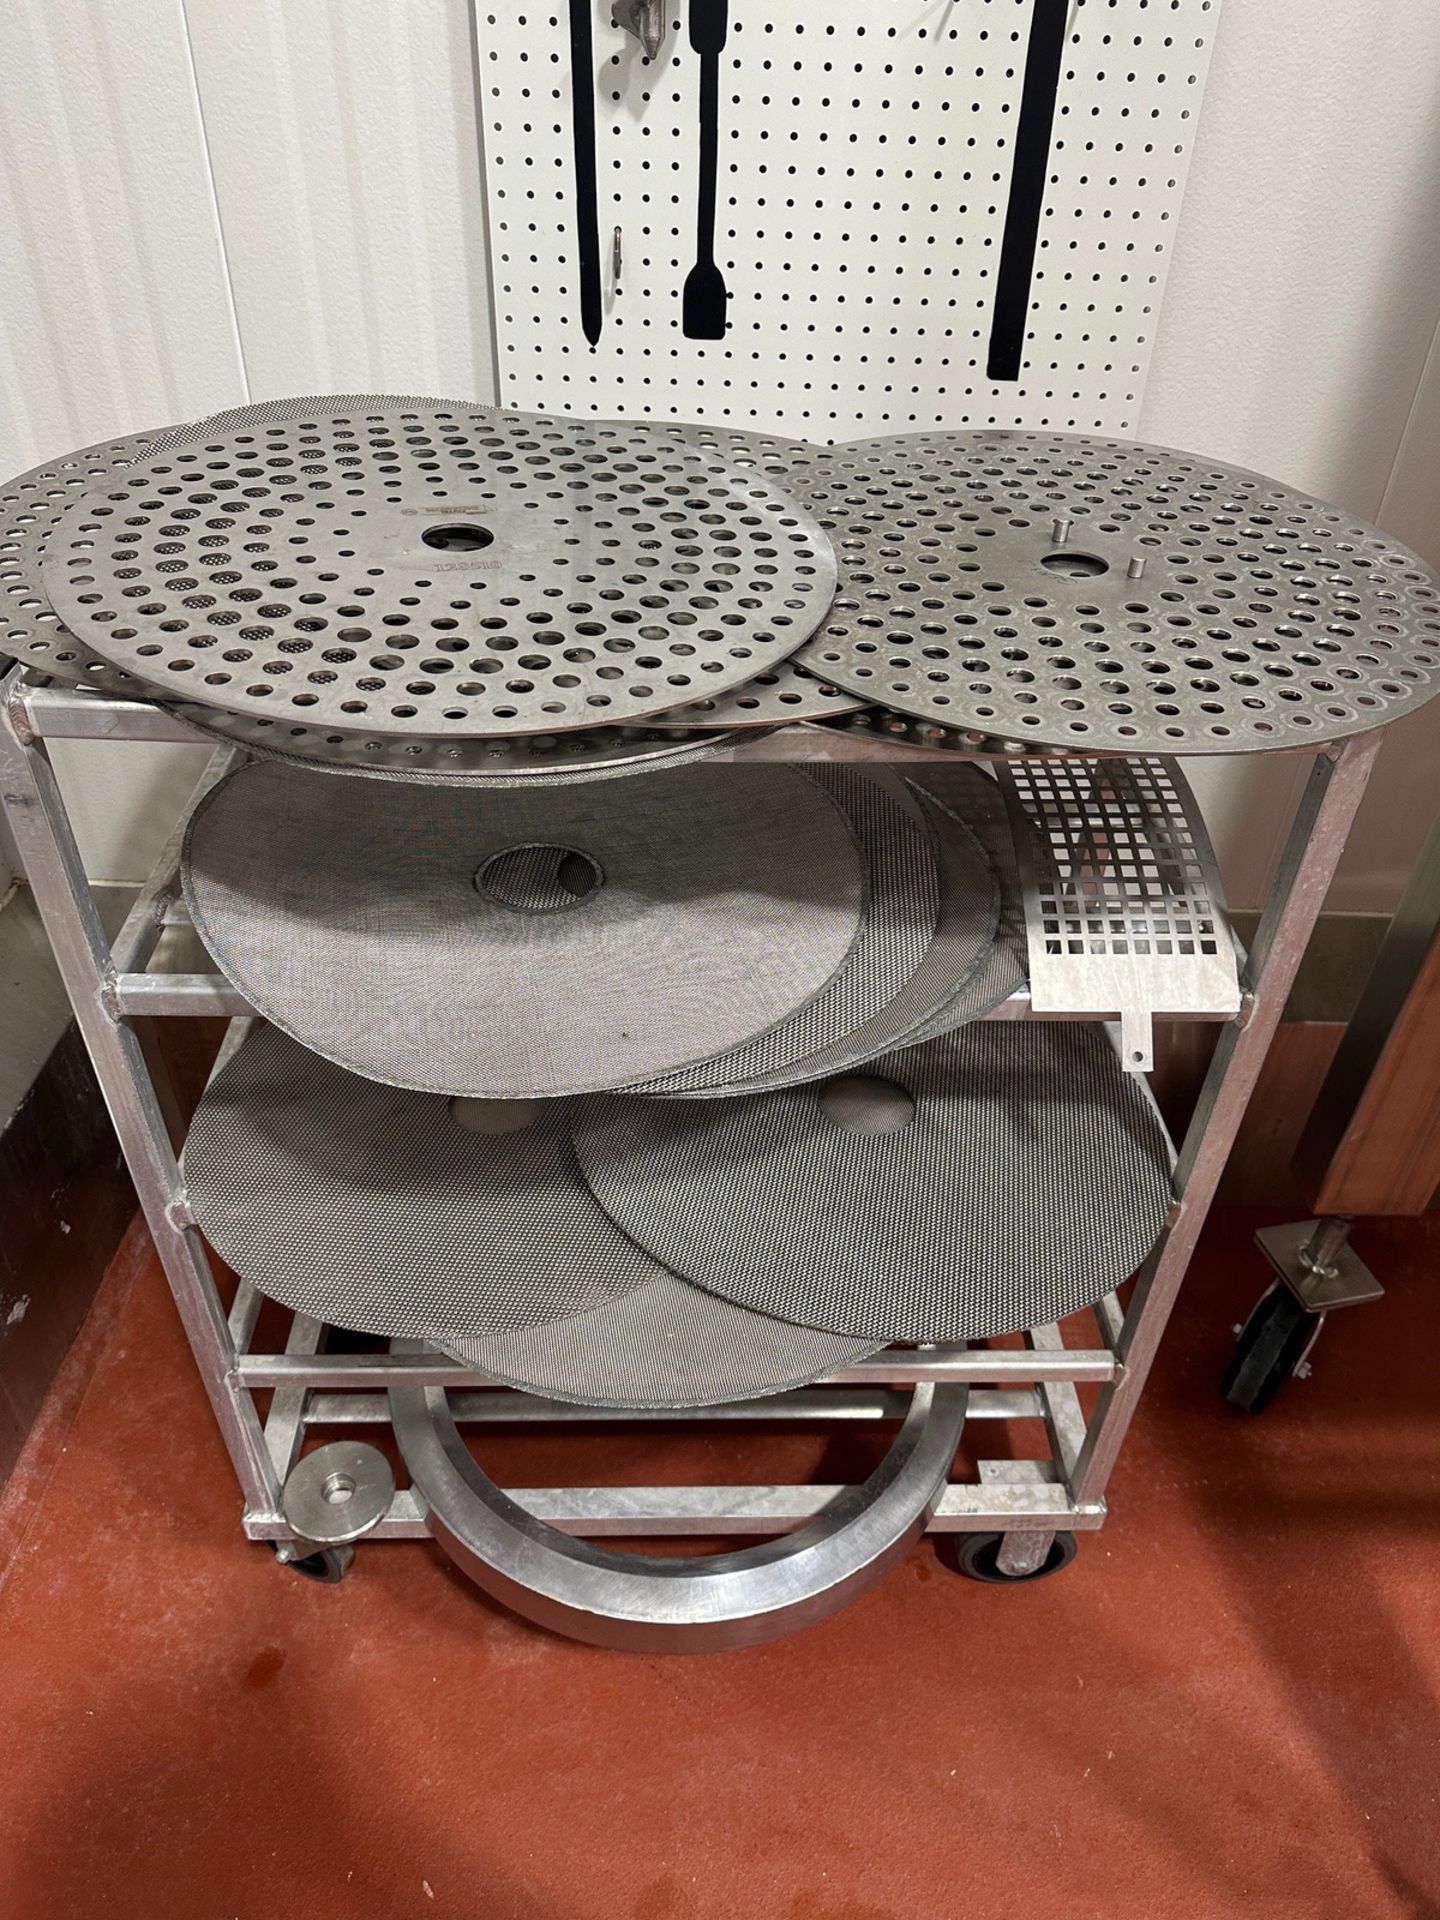 2018 Deville Technologies FS40 Cheese Shredder, Grate Disks, 20 HP Drive, S/N 0143- | Rig Fee $700 - Image 6 of 6